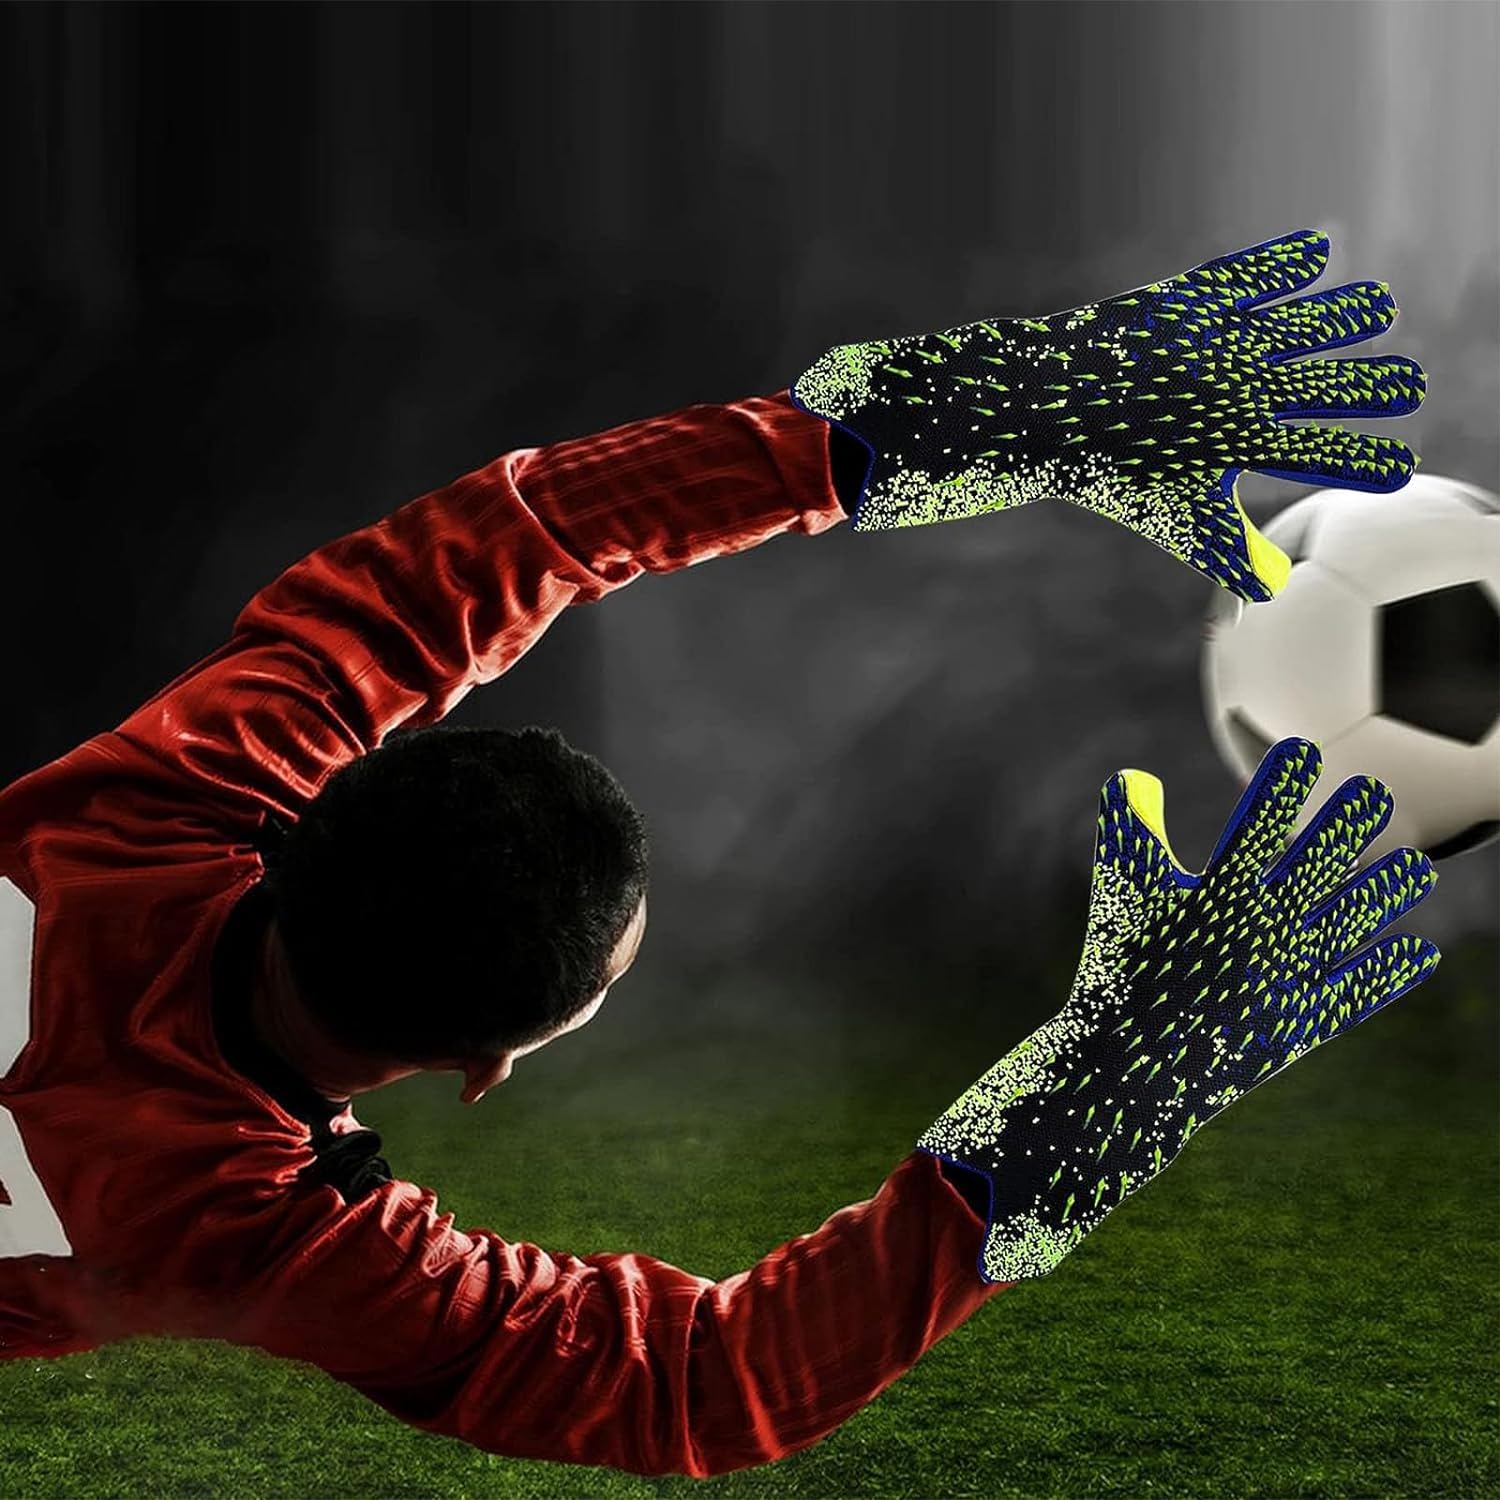 Xspring Football Goalkeeper Gloves, Strong Grip Soccer Gloves Goalkeeper, Abrasion-Resistant and Non-slip Soccer Goalie Gloves, Football Gloves for Kids Youth and Adult Soccer Gloves